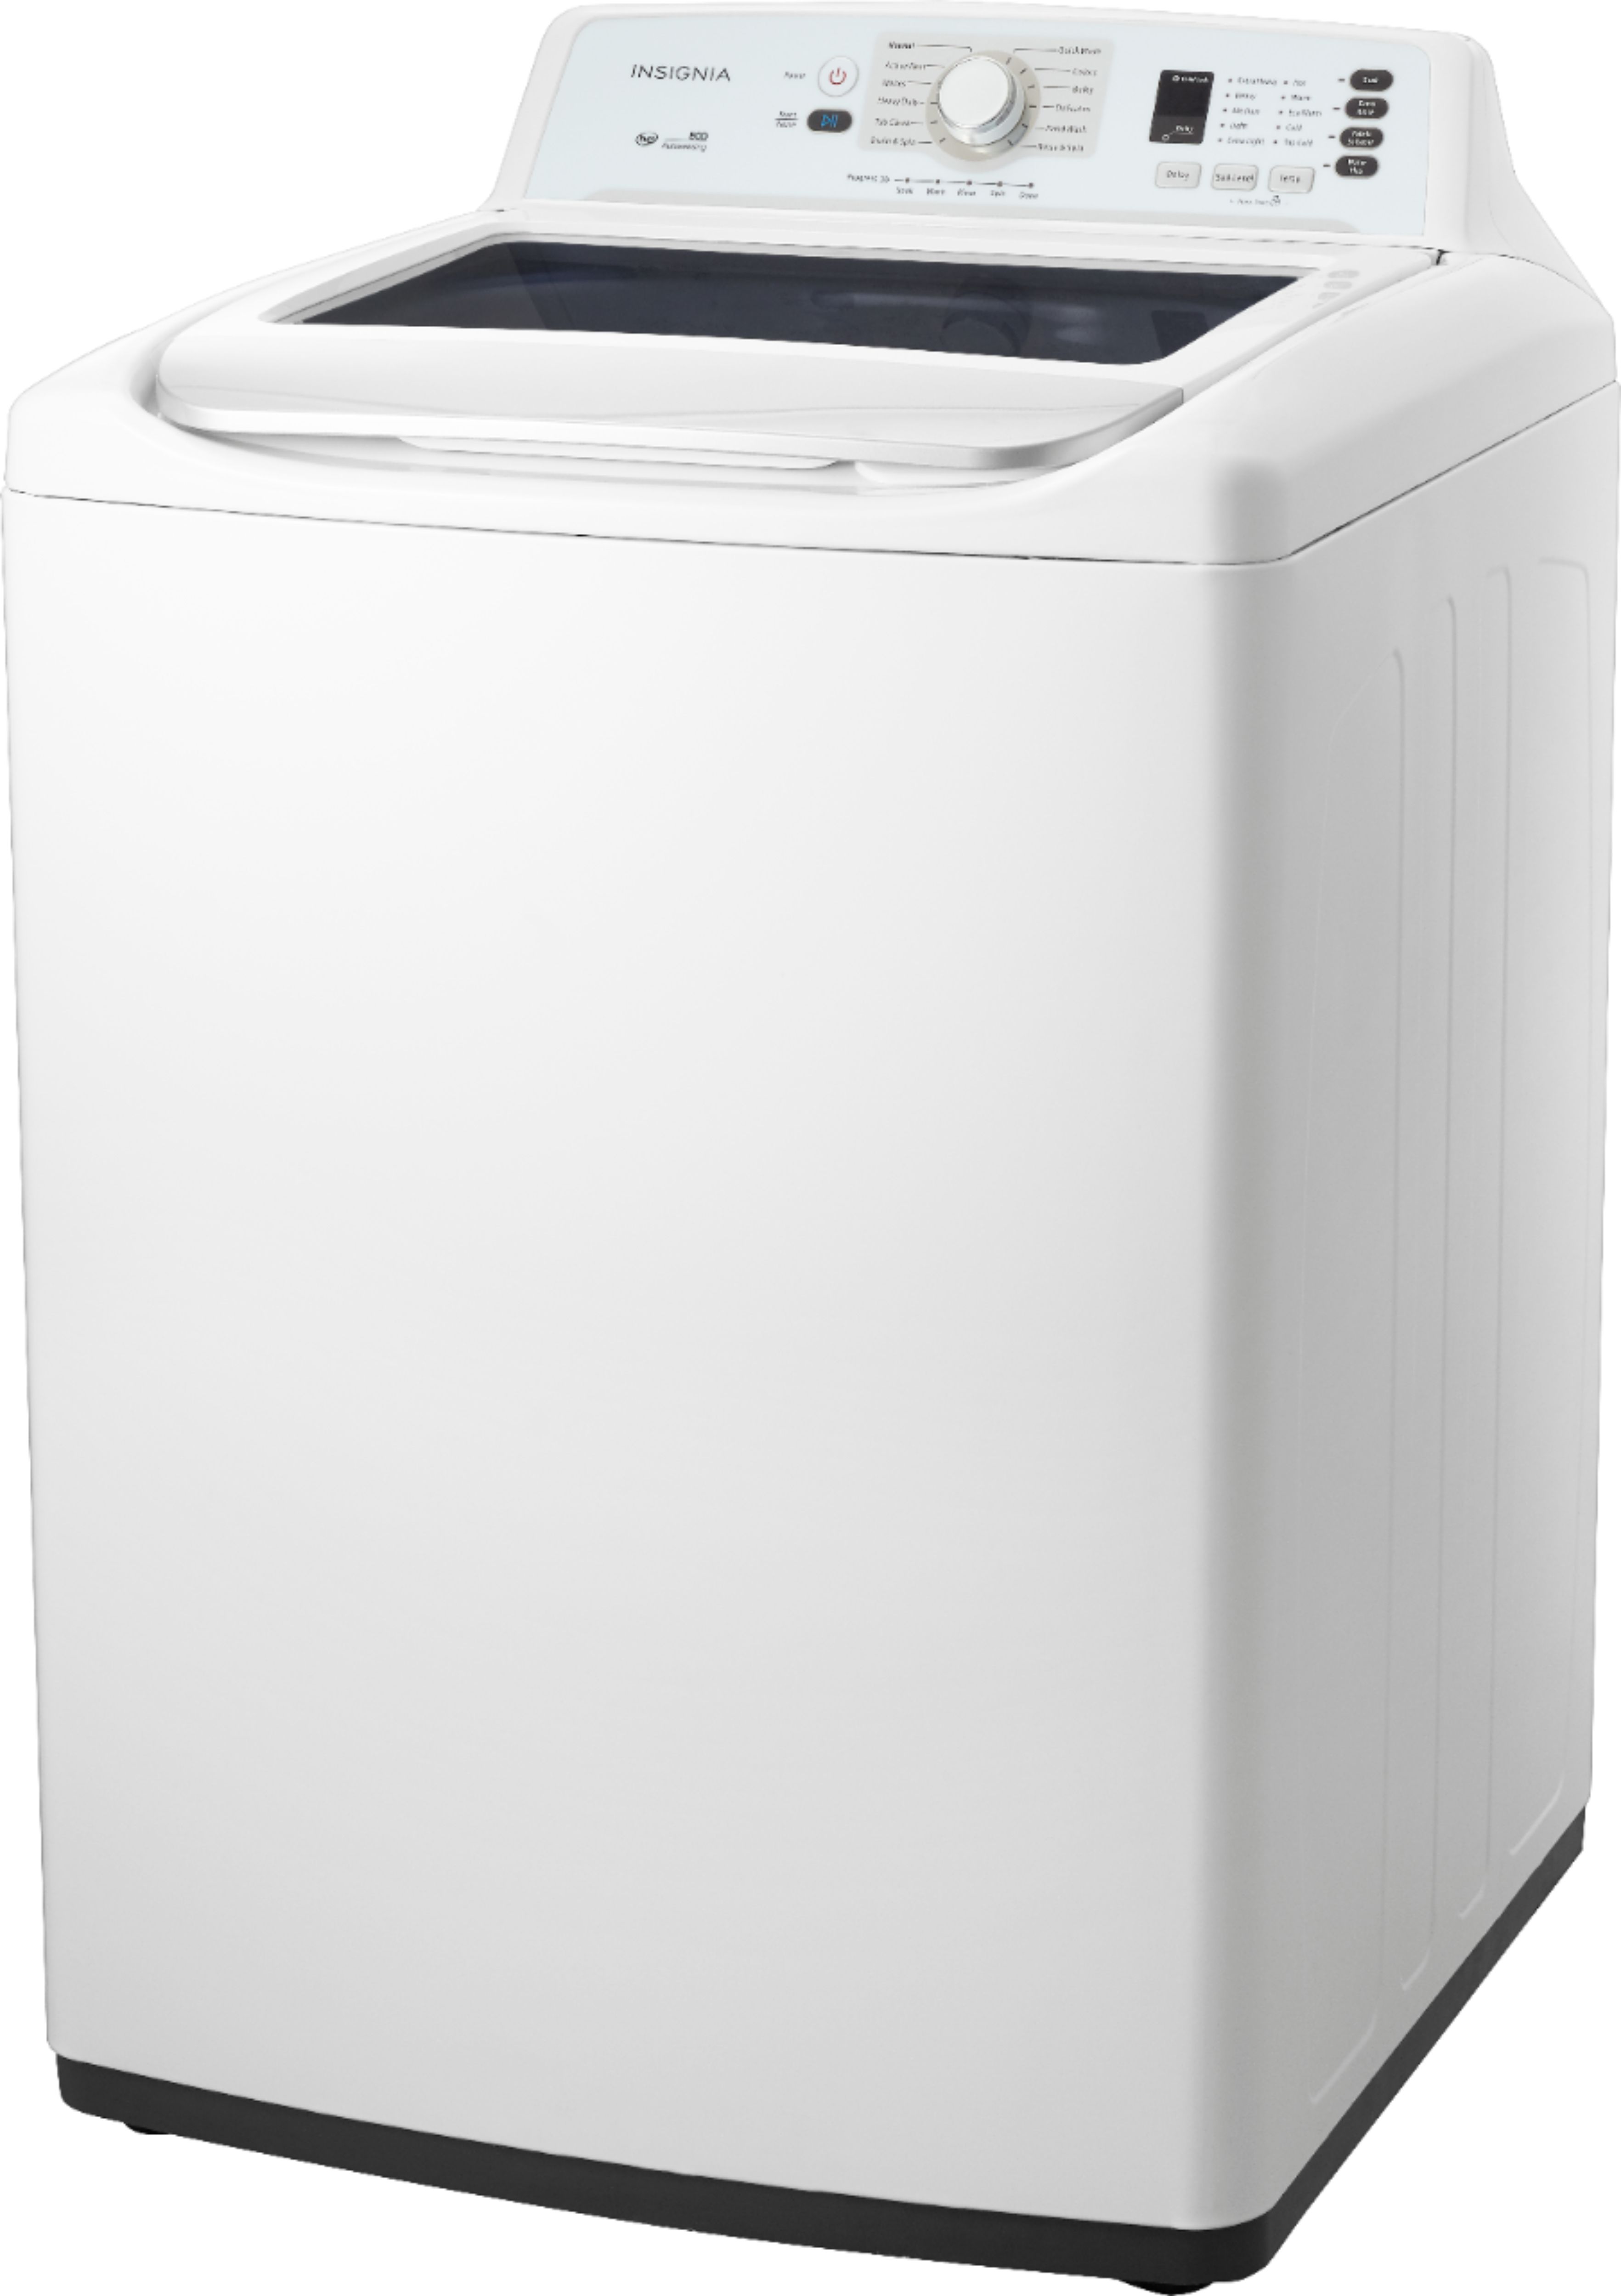 Left View: GE - 4.5 Cu. Ft. Top Load Washer with Precise Fill - White on White